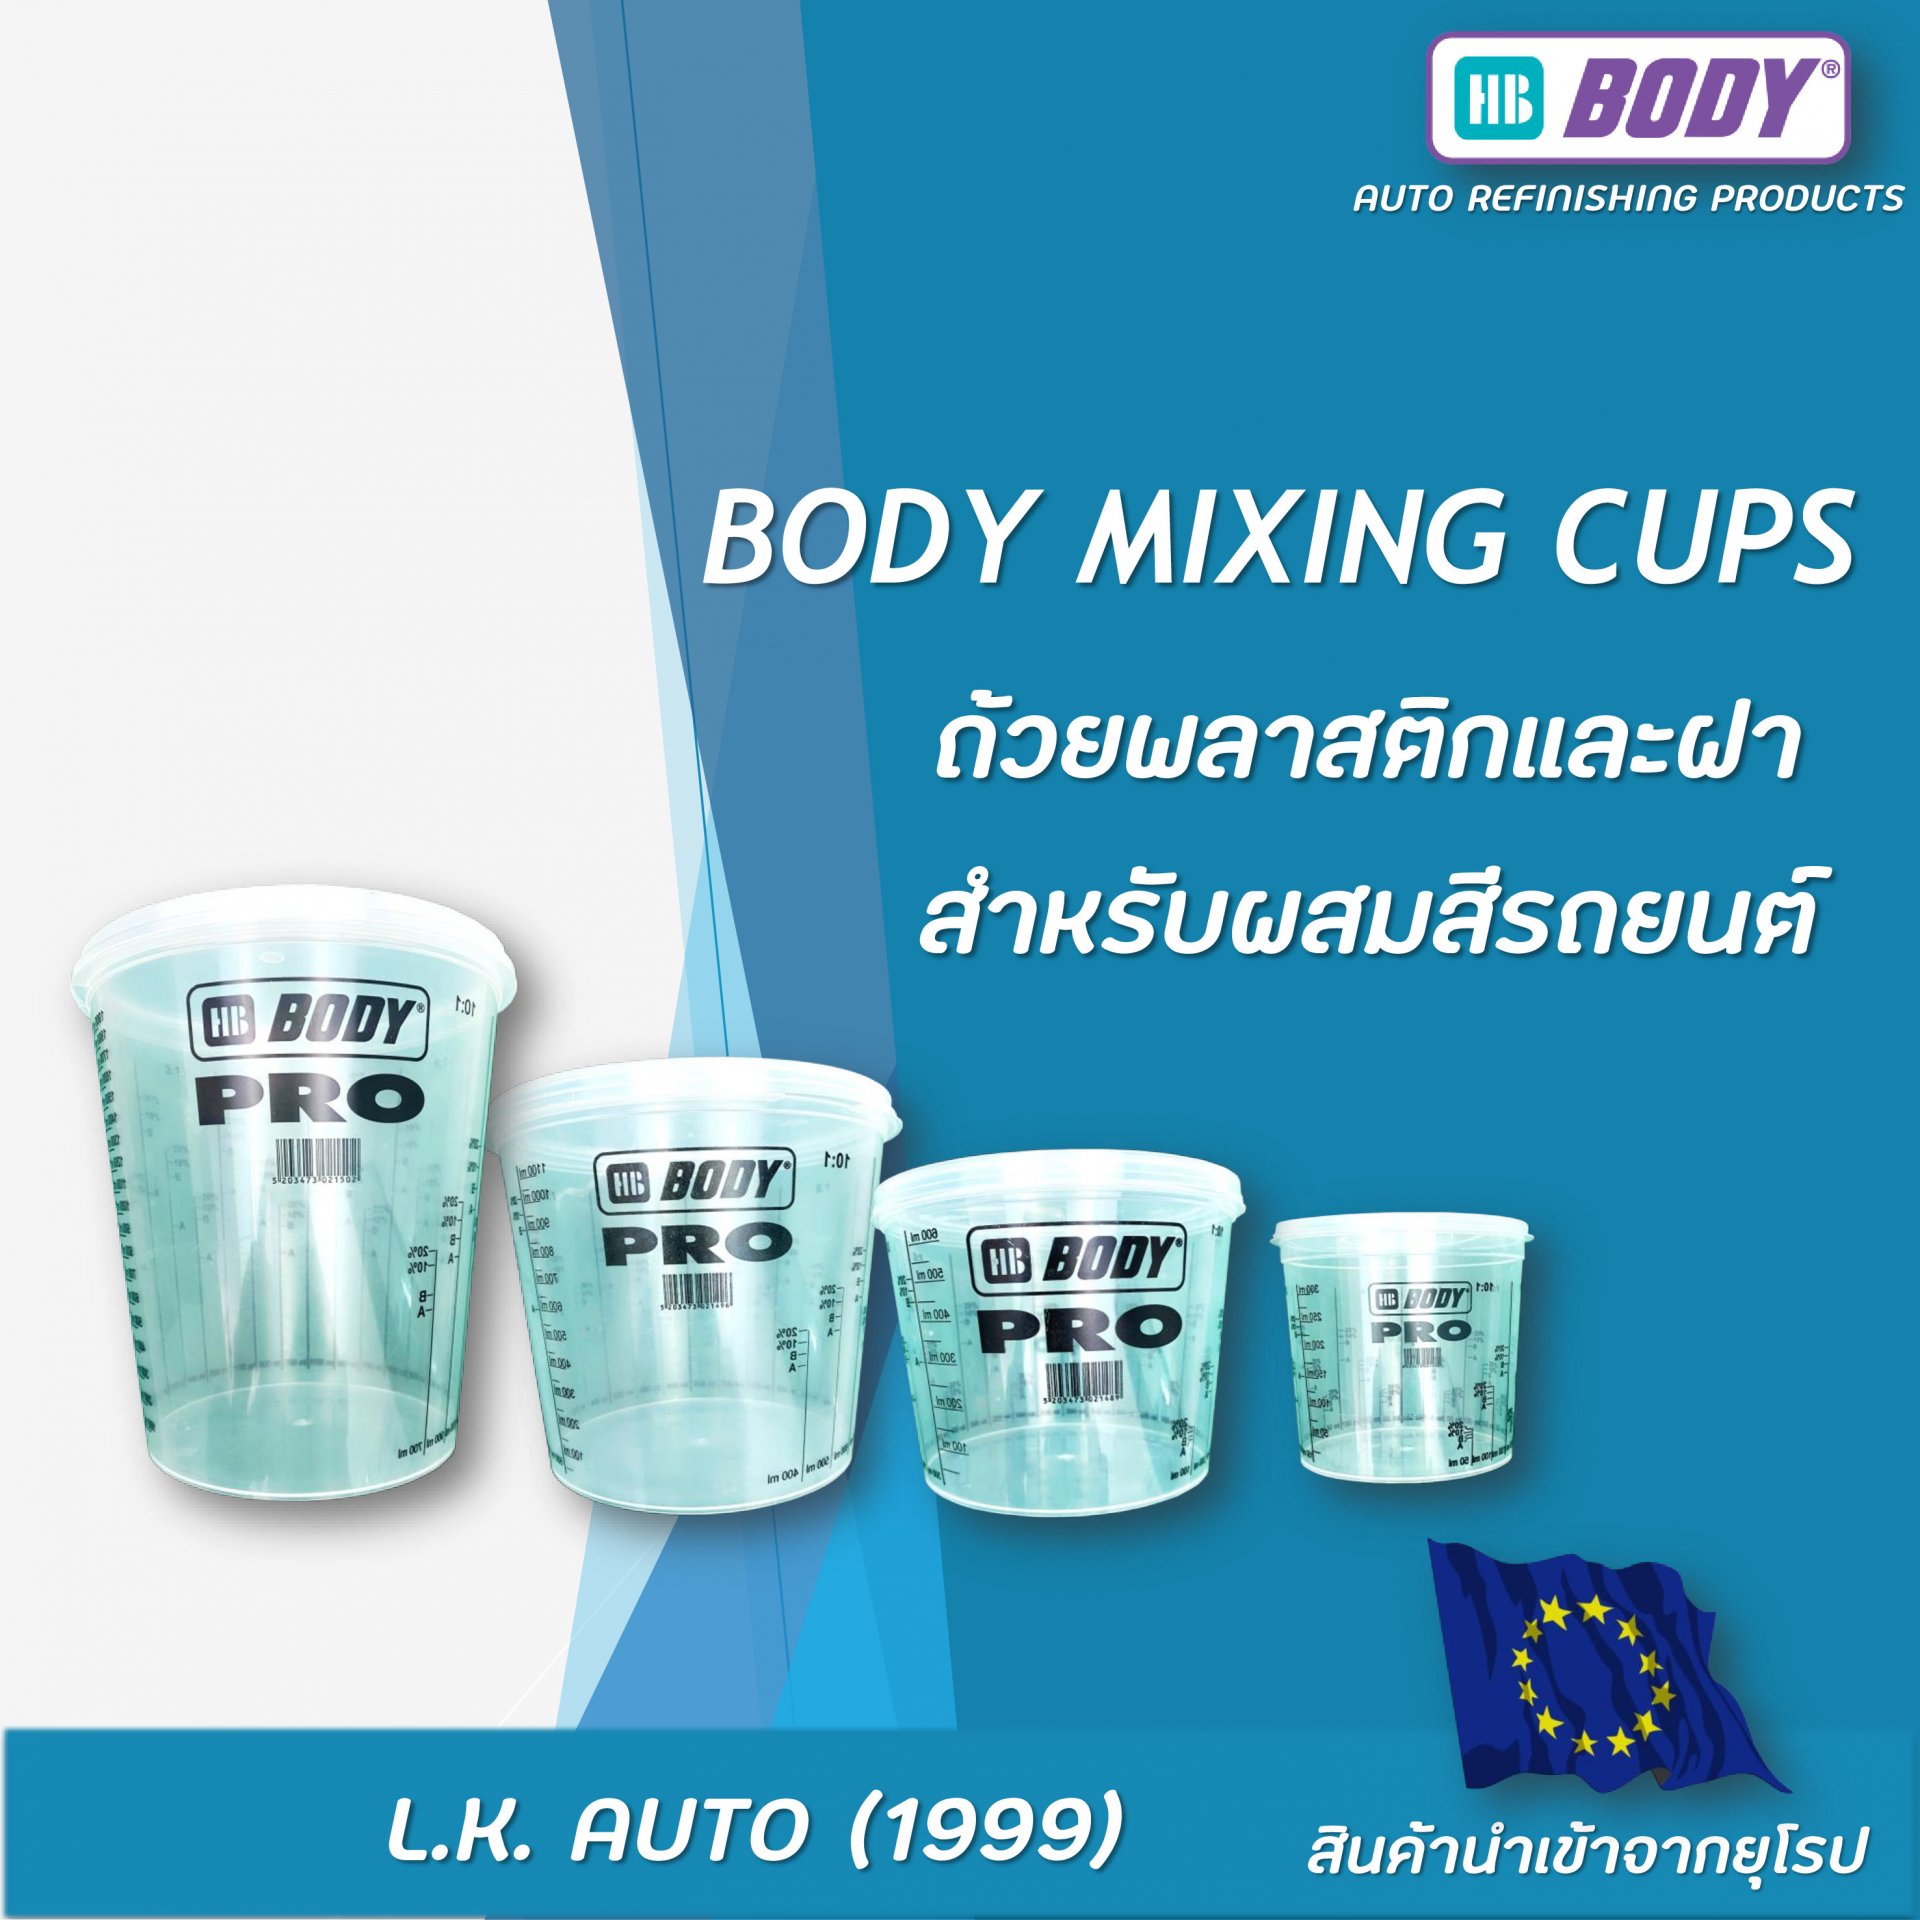 BODY MIXING CUPS